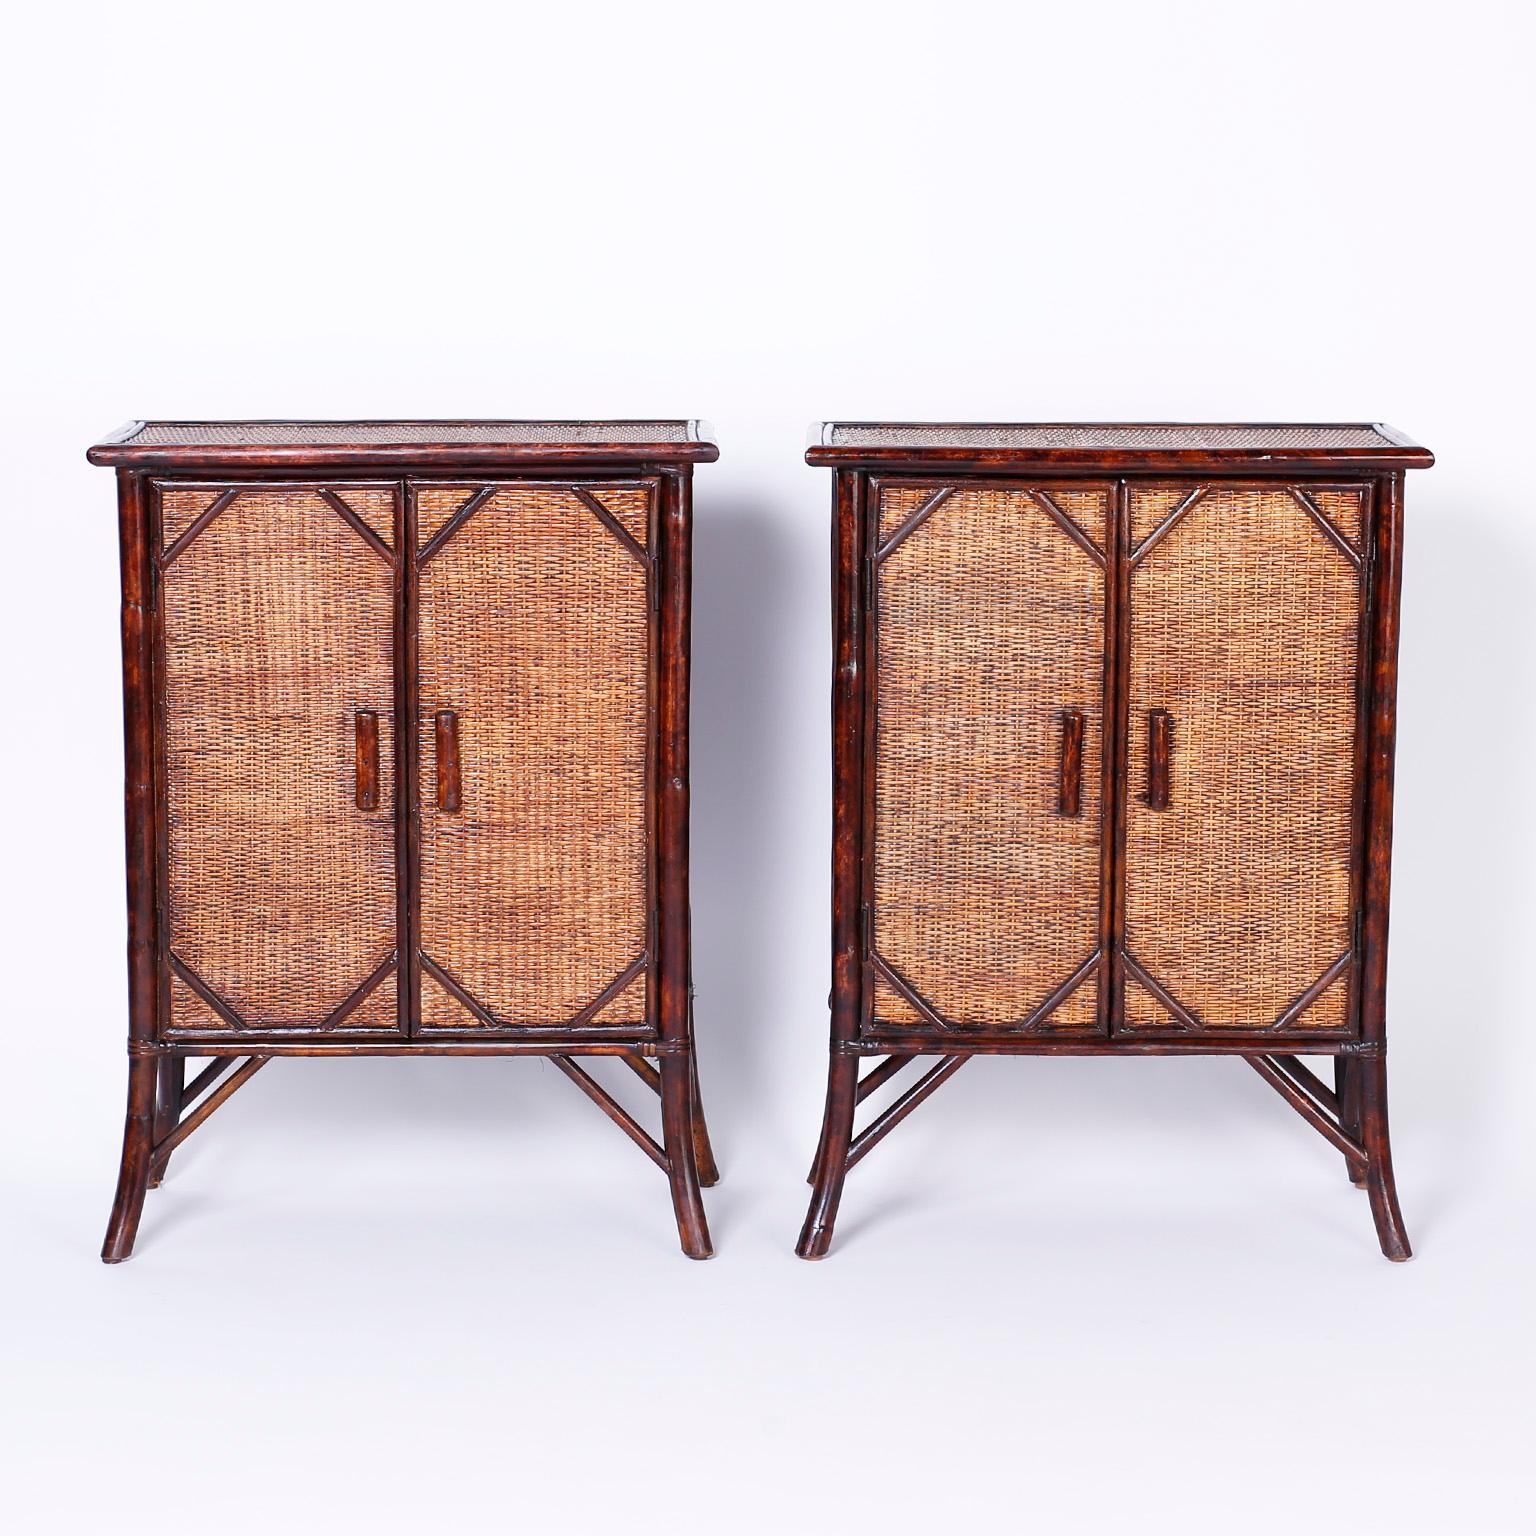 Handsome pair of two door cabinets having faux bamboo frames with Asian style splayed legs, rugged grasscloth or woven wicker tops, sides and fronts with plenty of open storage and hard to find slim profiles.